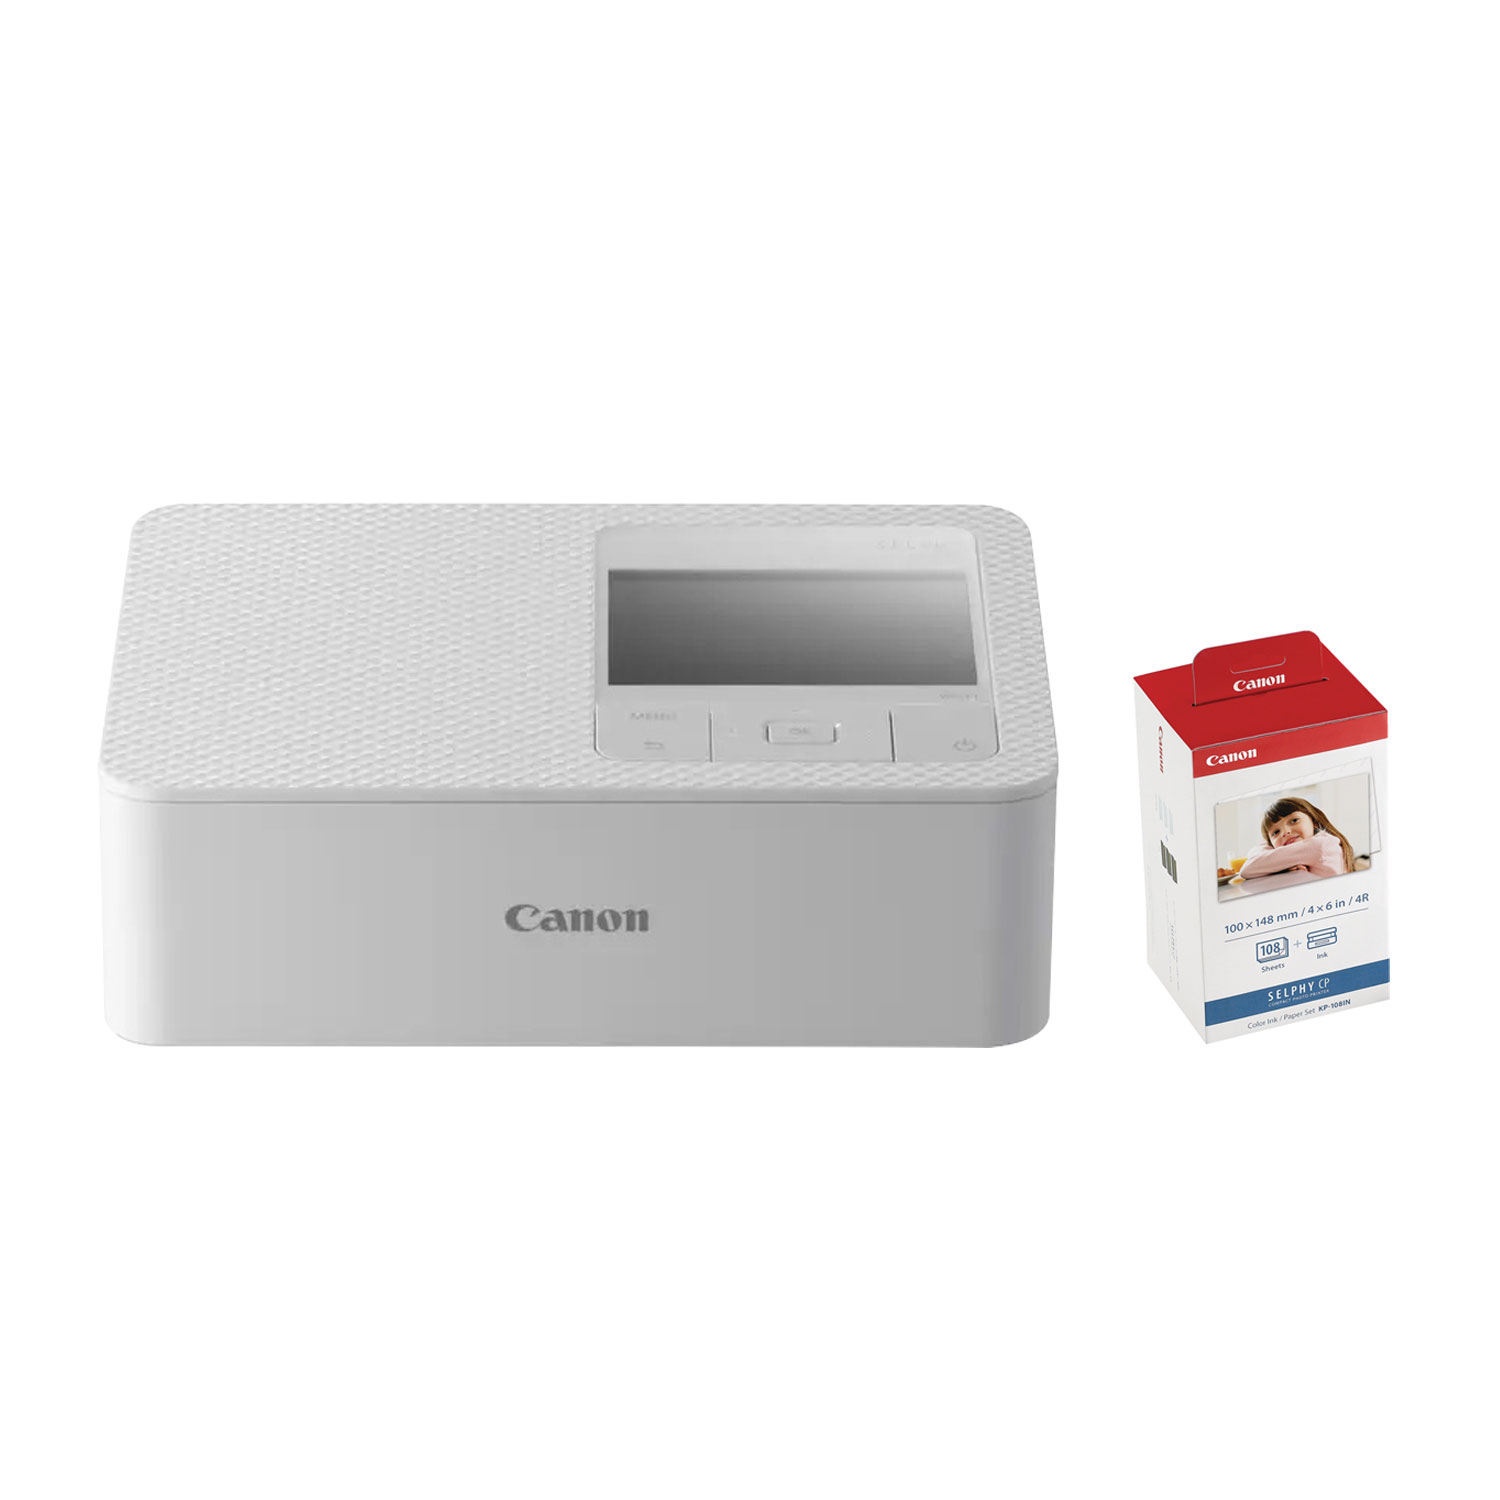 Canon SELPHY CP1500 Wireless Compact Photo Printer with Colour Ink & Photo Paper Set - White